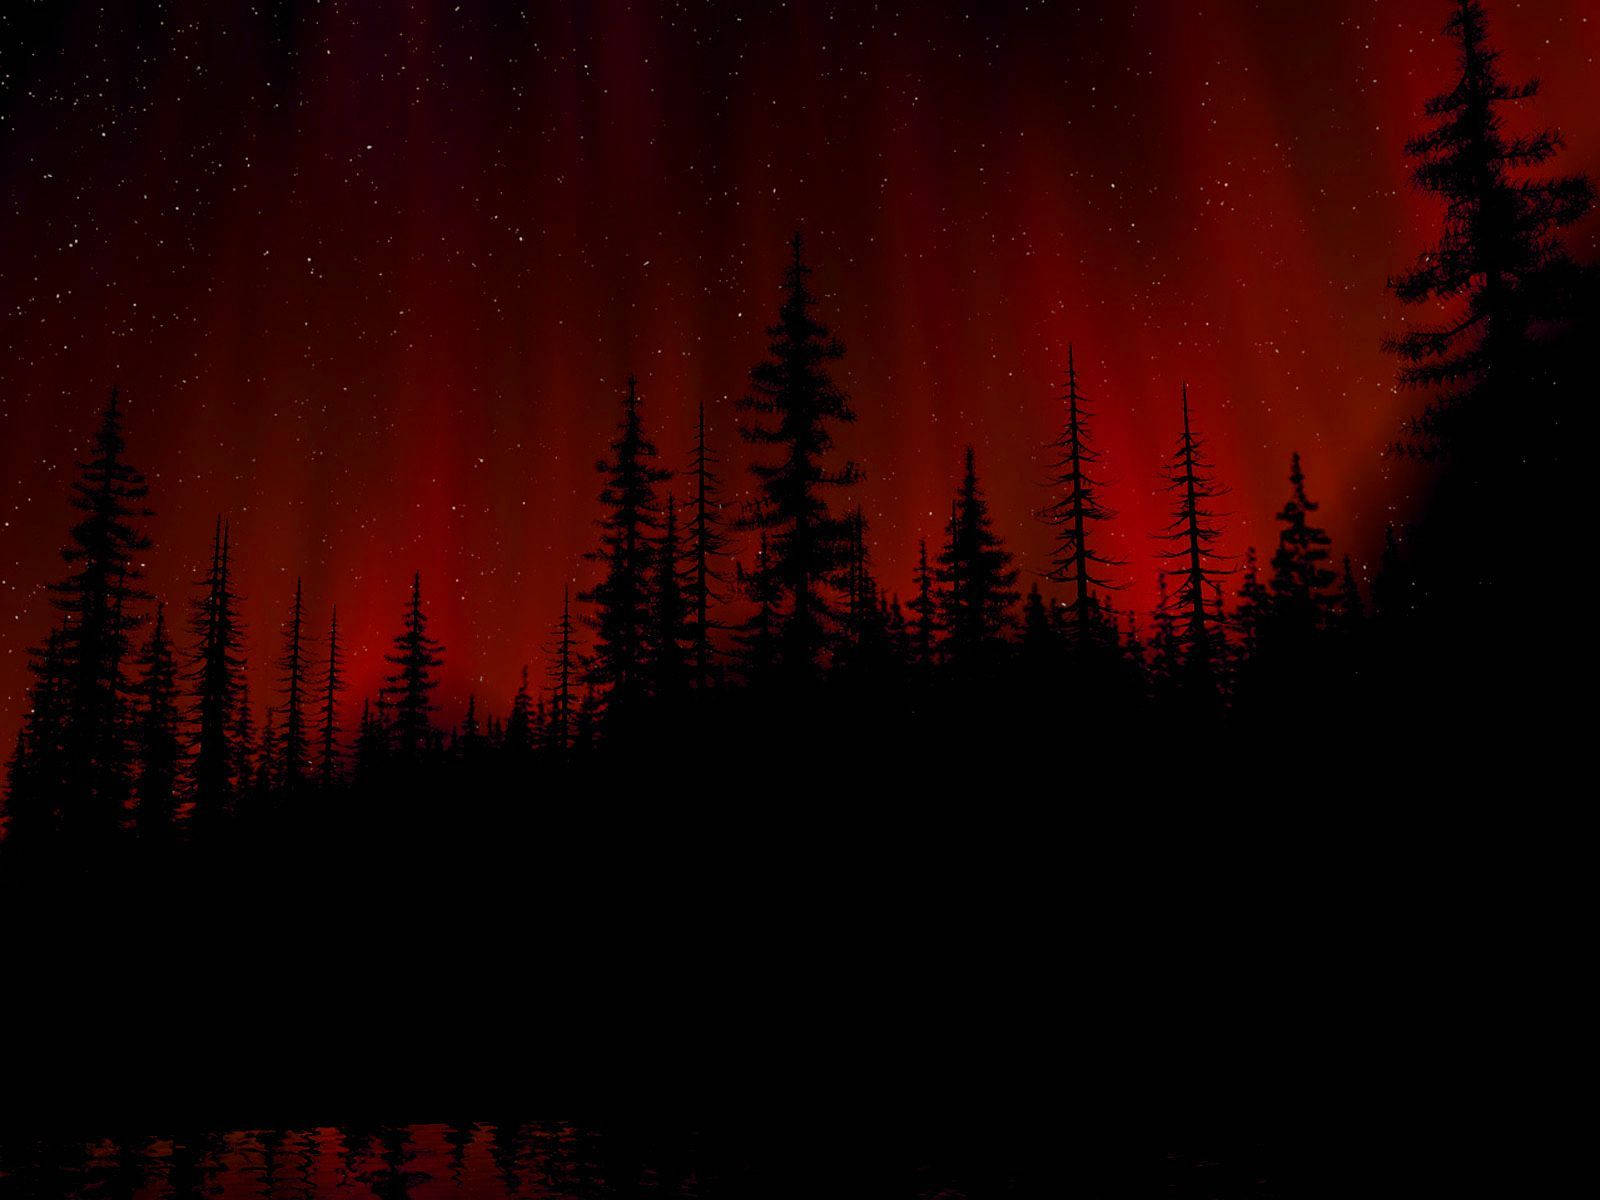 Black And Red Forest Wth Trees